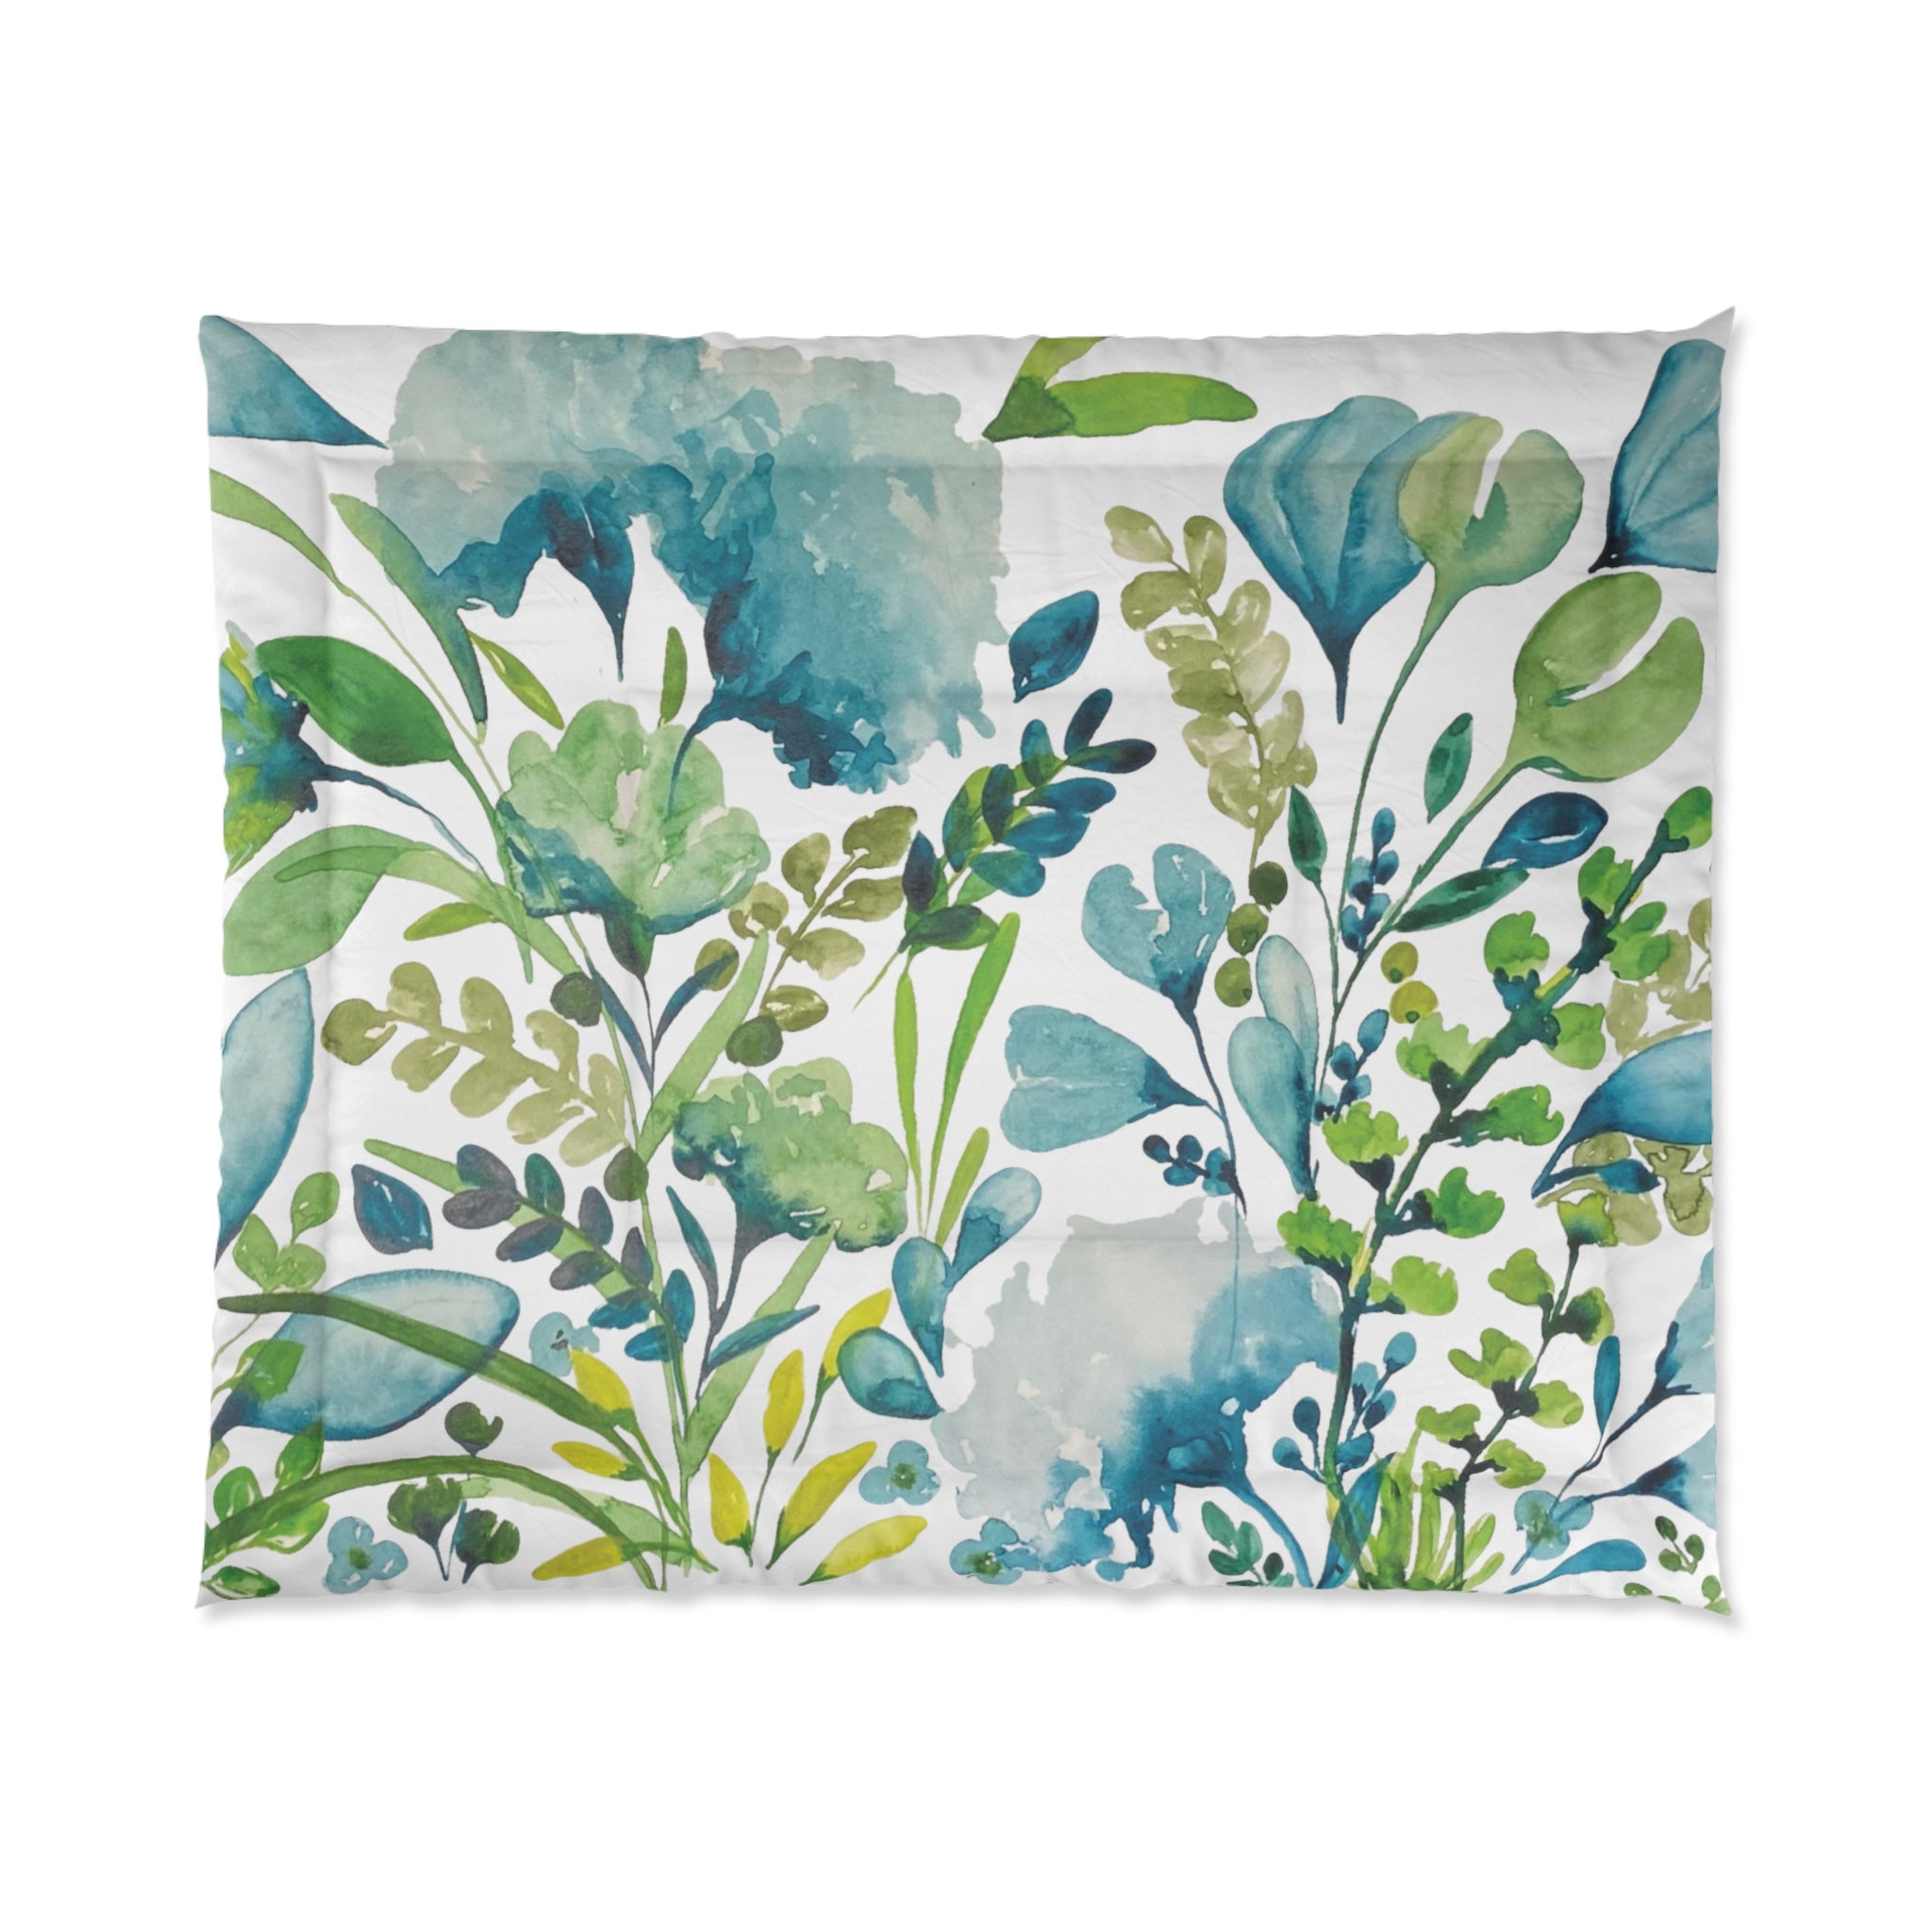 Emerald Green & Turquoise Floral Print on Comforter